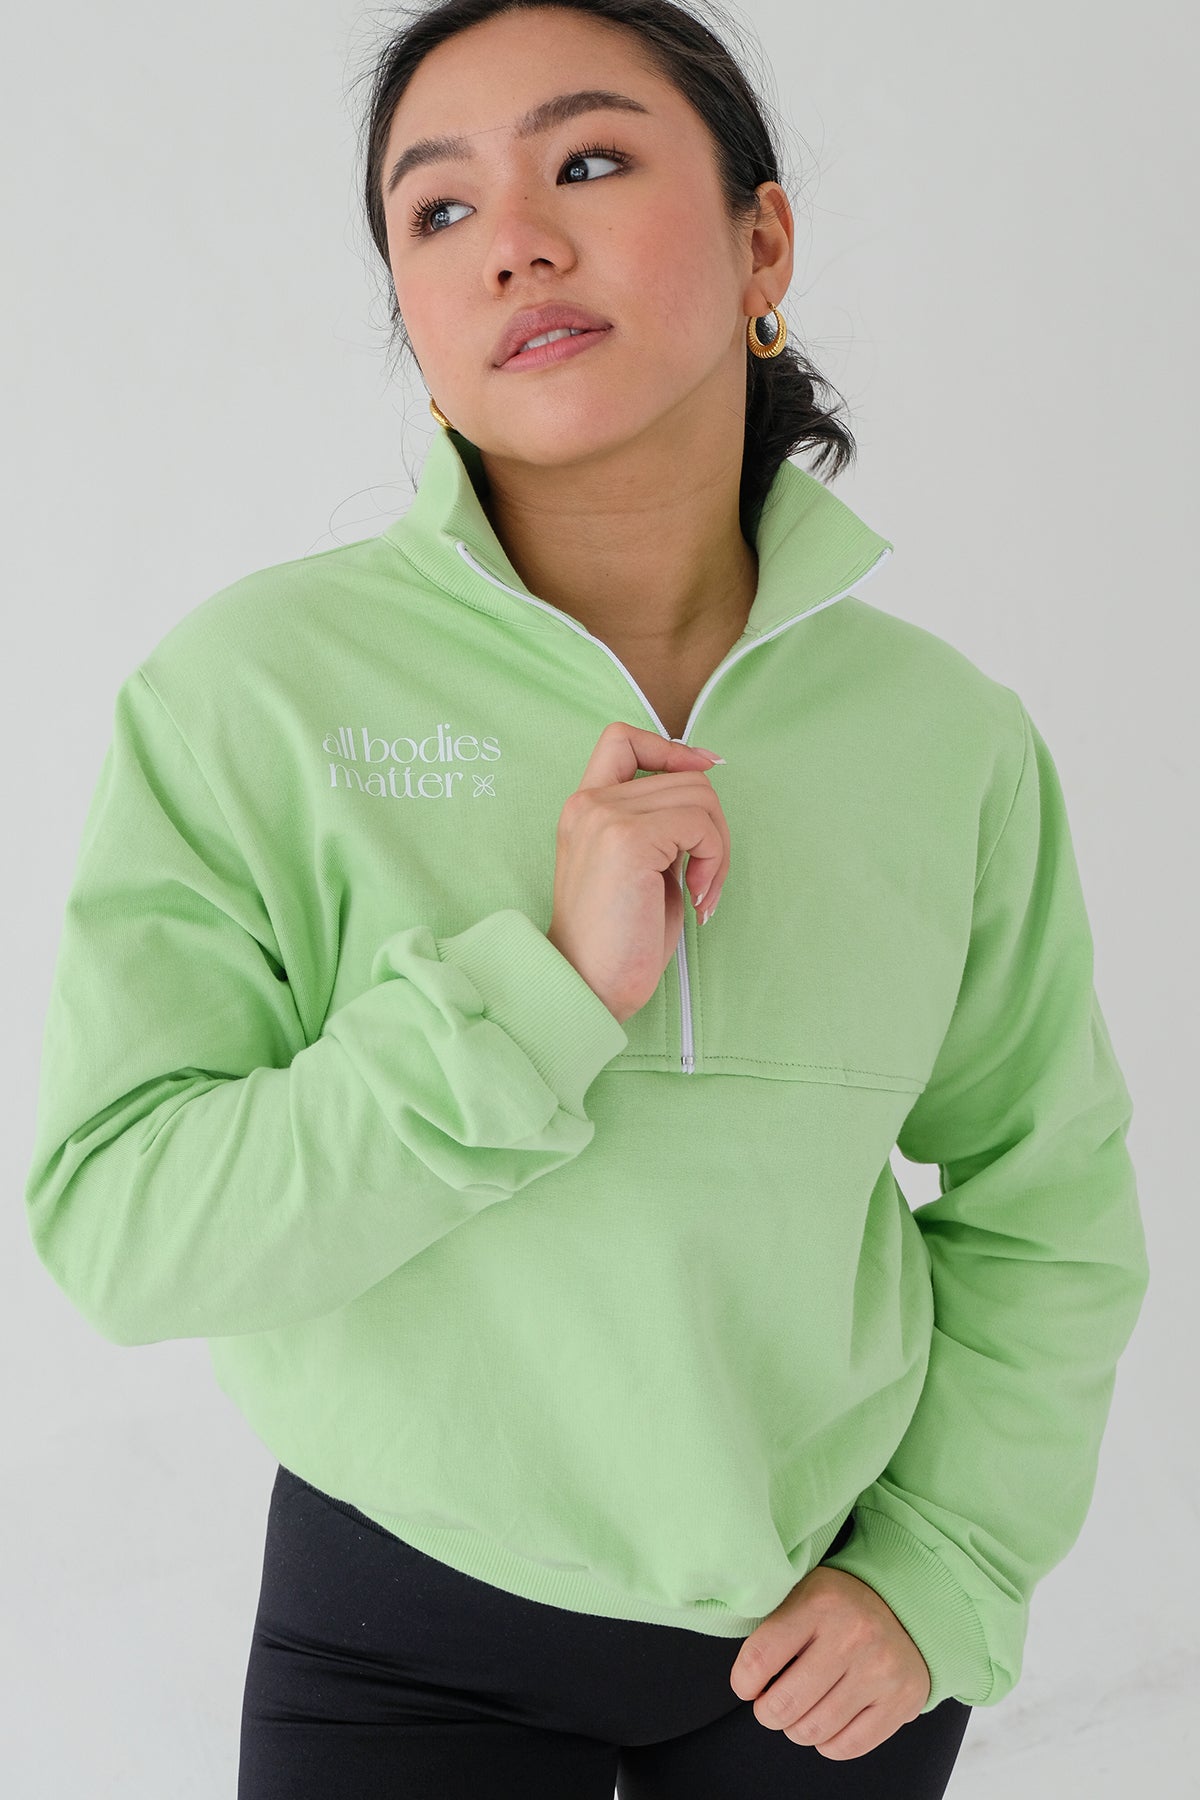 All Bodies Matter Sweater In Lime (5 LEFT)